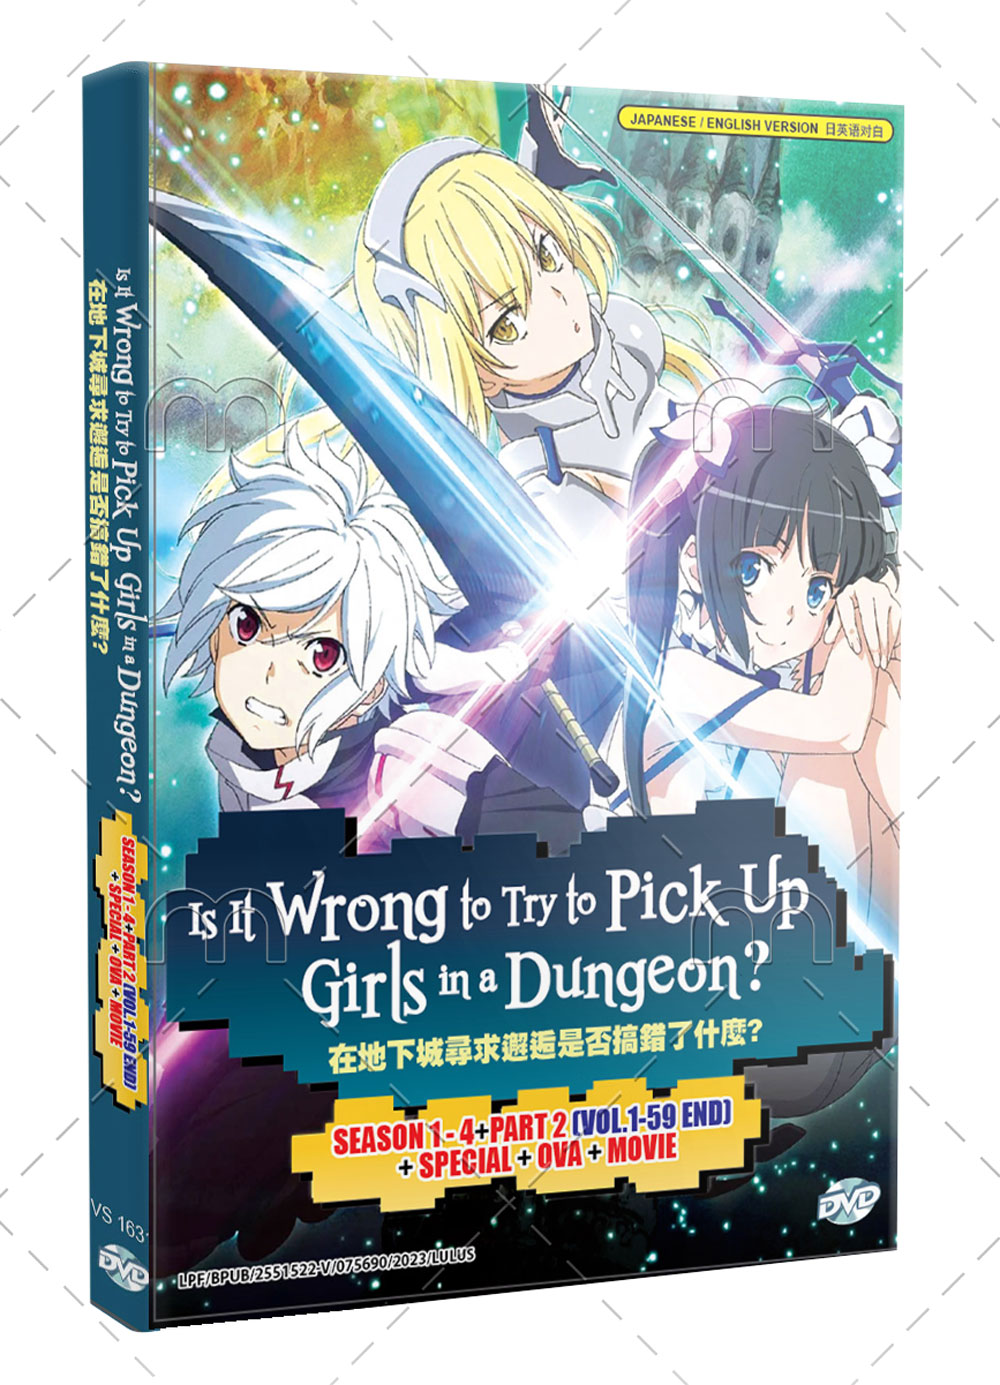 Is It Wrong to Try to Pick Up Girls in a Dungeon? Season 1-4 +Part 2 +Special +OVA +Movie (DVD) (2019-2023) Anime